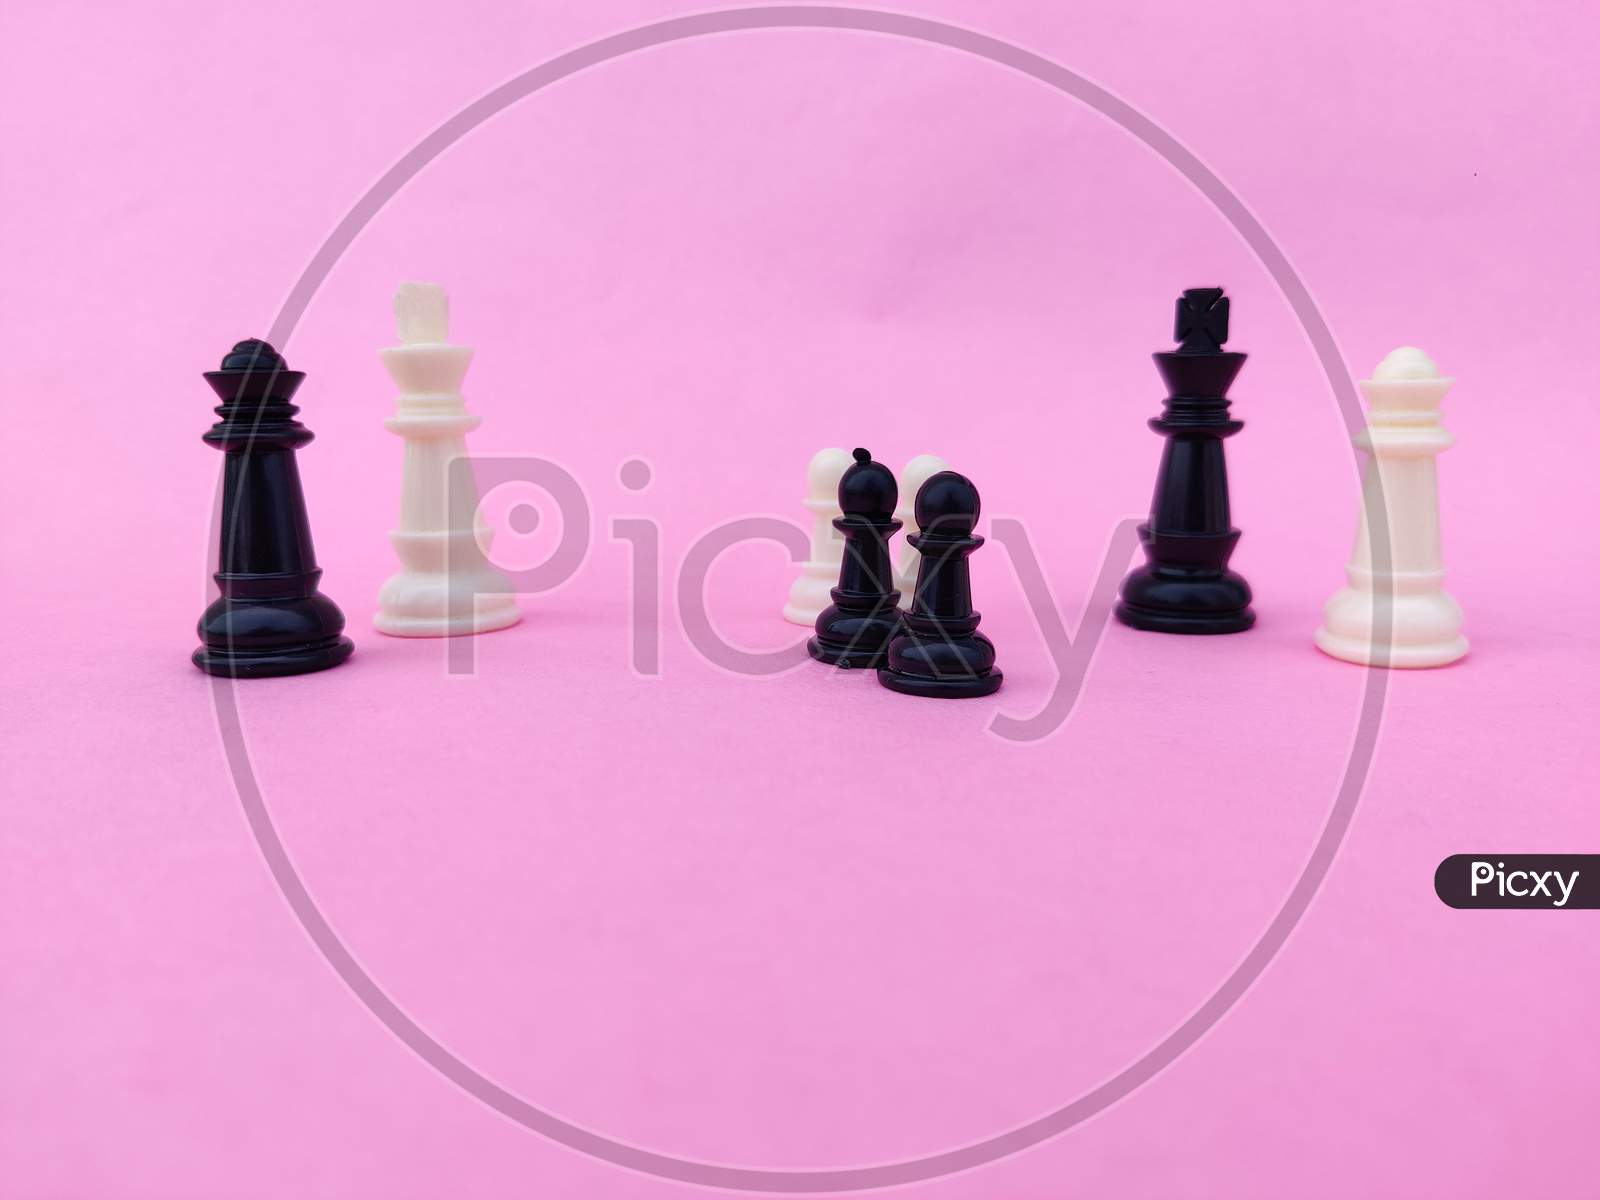 Black And White Chess King,Queen Separated By Black And White Pawns. Isolated On Pink Background.